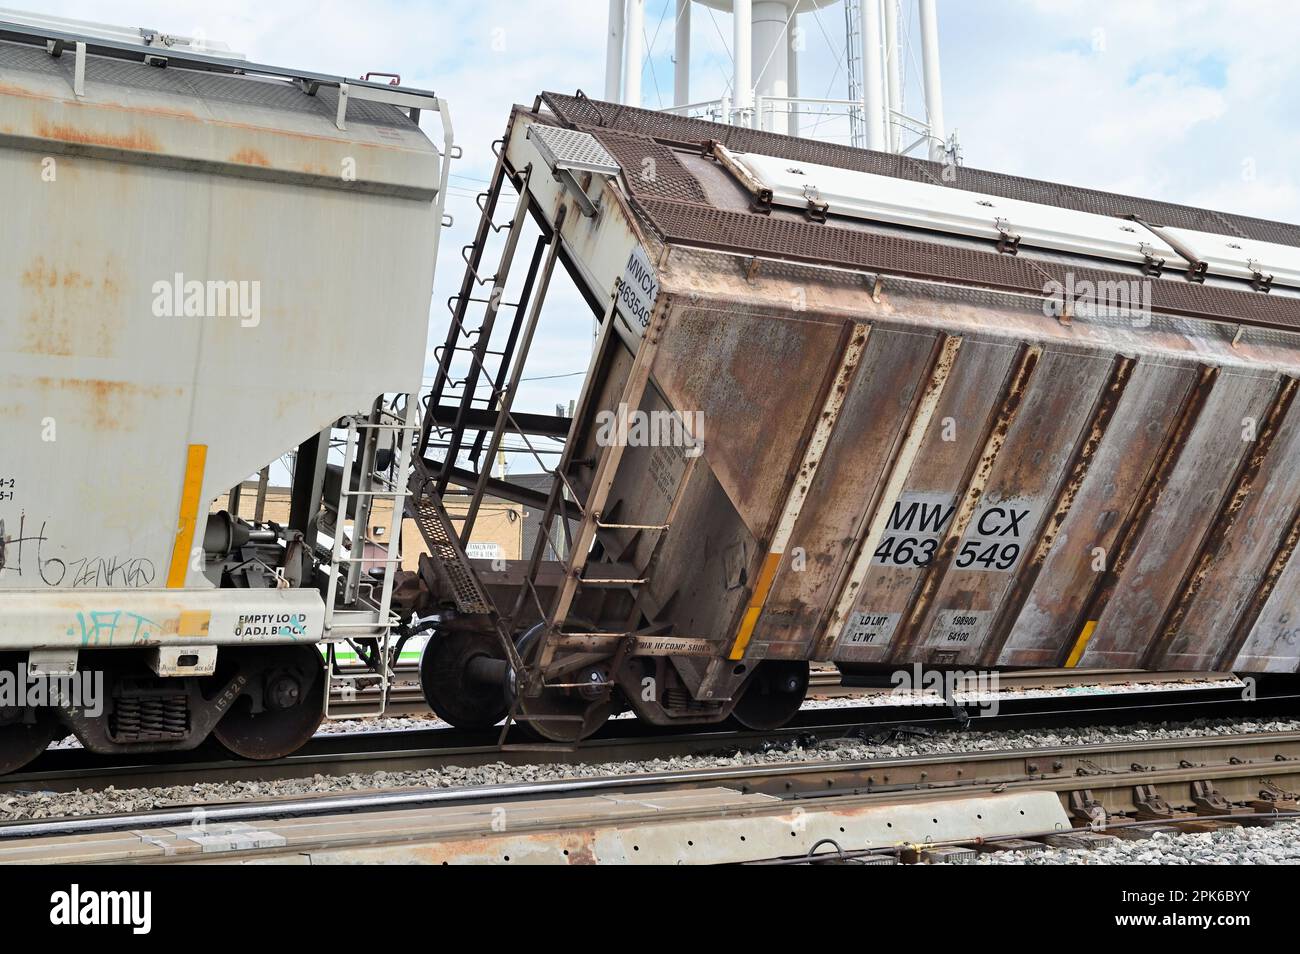 Franklin Park, Illinois, USA. Two cars of an eastbound Canadian Pacific freight train derailed just east of the railway's Bensenville Yard. Stock Photo